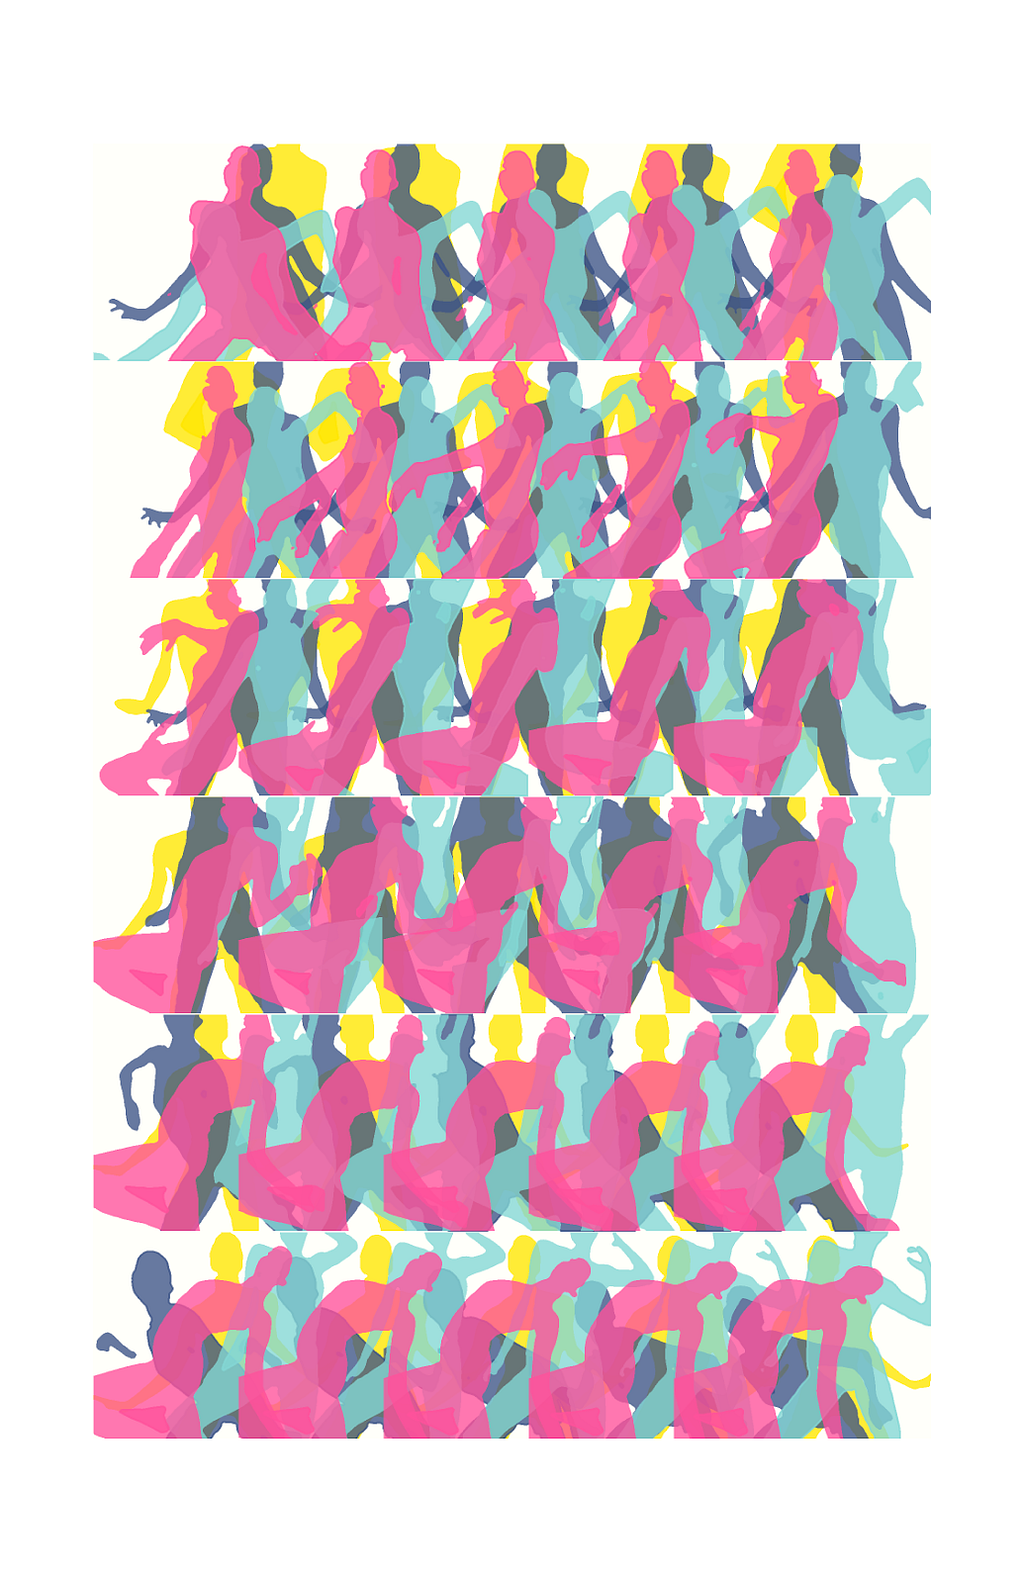 Six rows of a figure caught in various movements depicted in layers of the colors-yellow, blue-gray, turquoise, and pink.